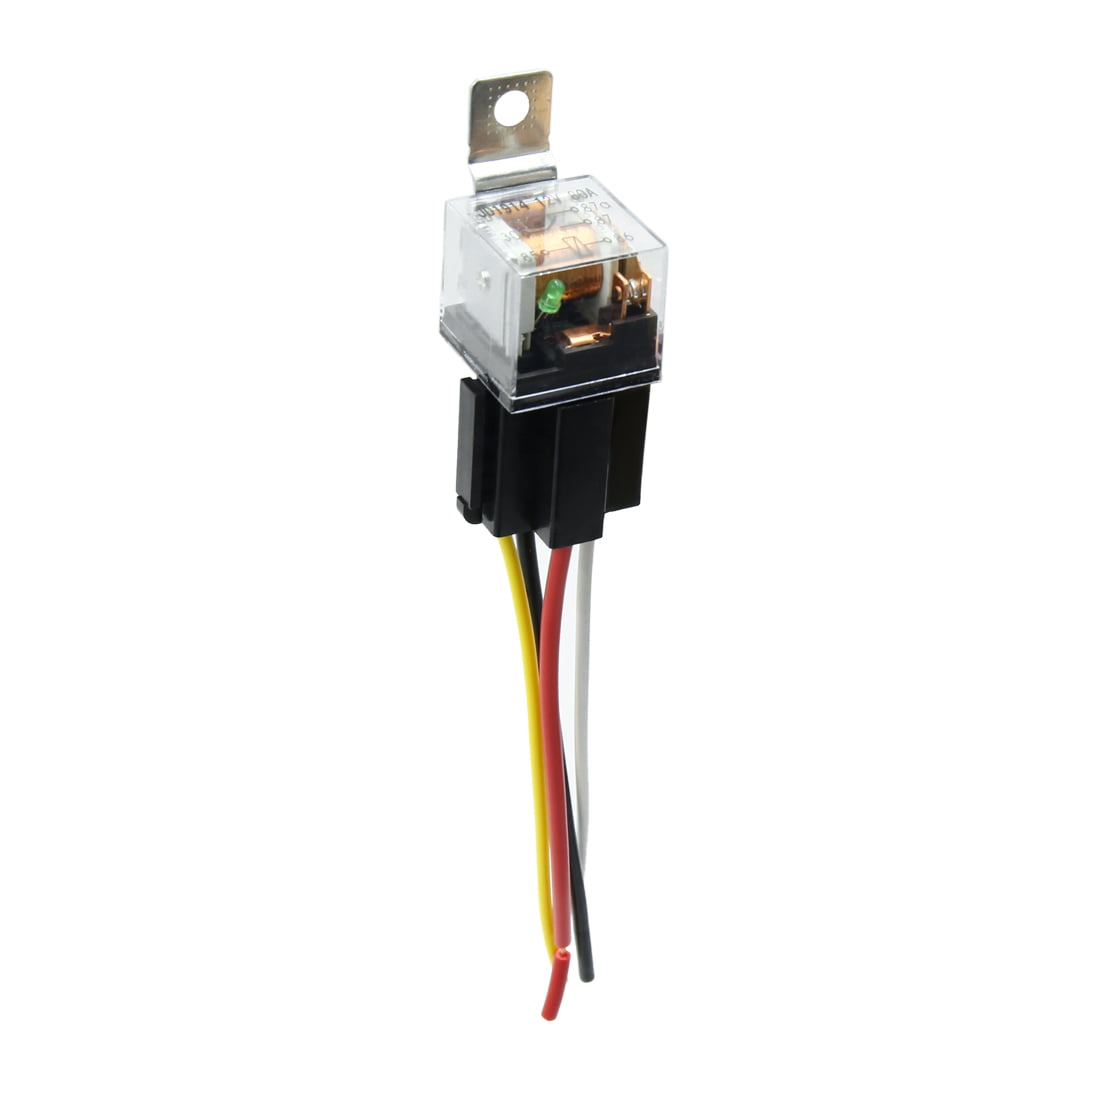 Relay 4 Pin 4 Wires W Harness Socket Waterproof Dc 12v 80a Spst Auto